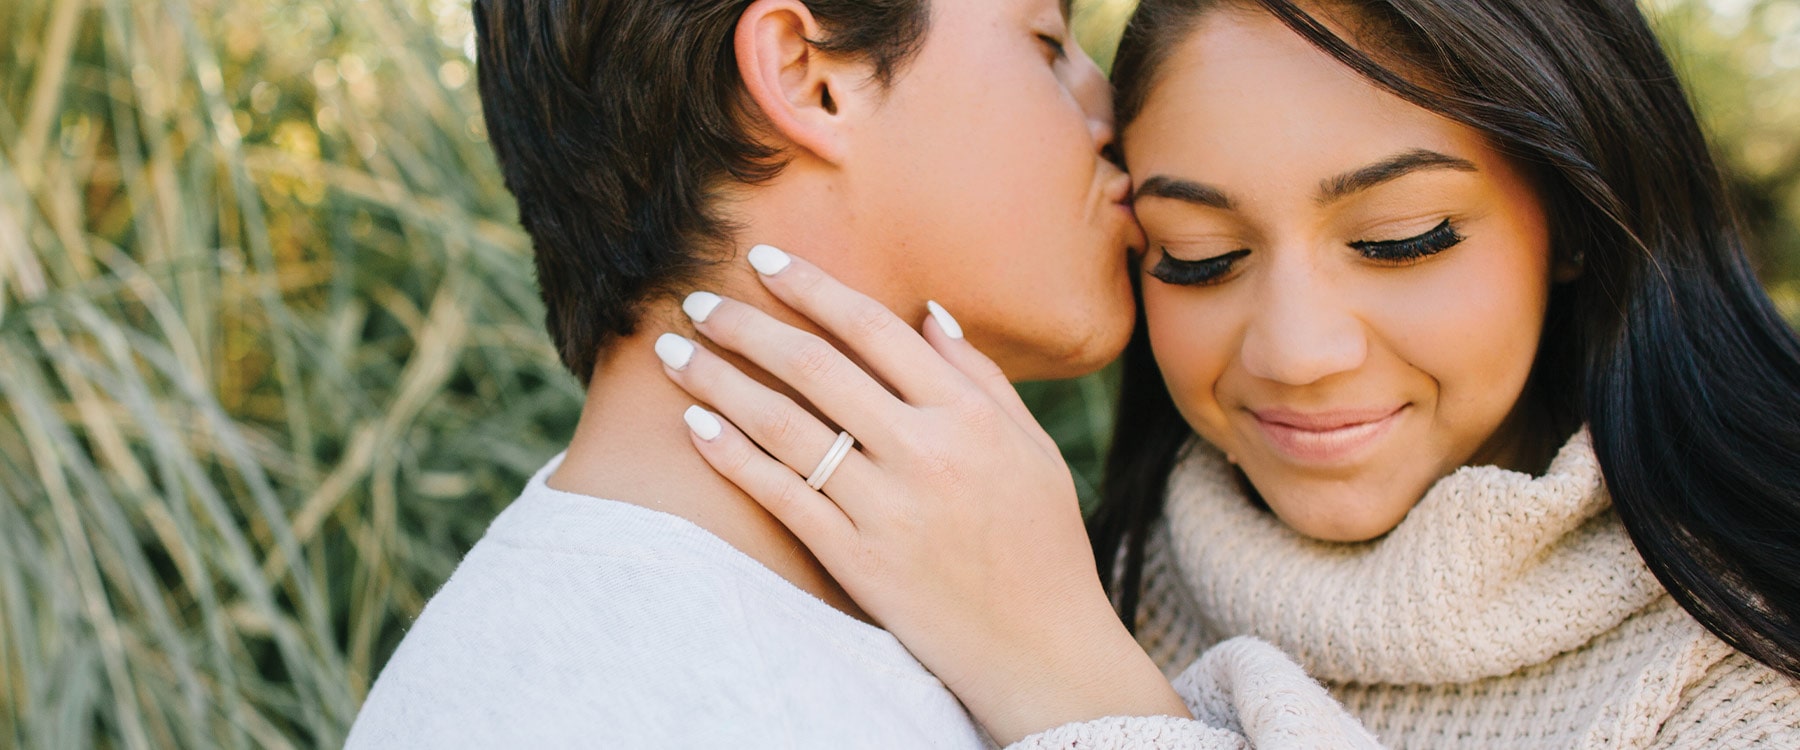 Why Do Couples Wear Silicone Rings?